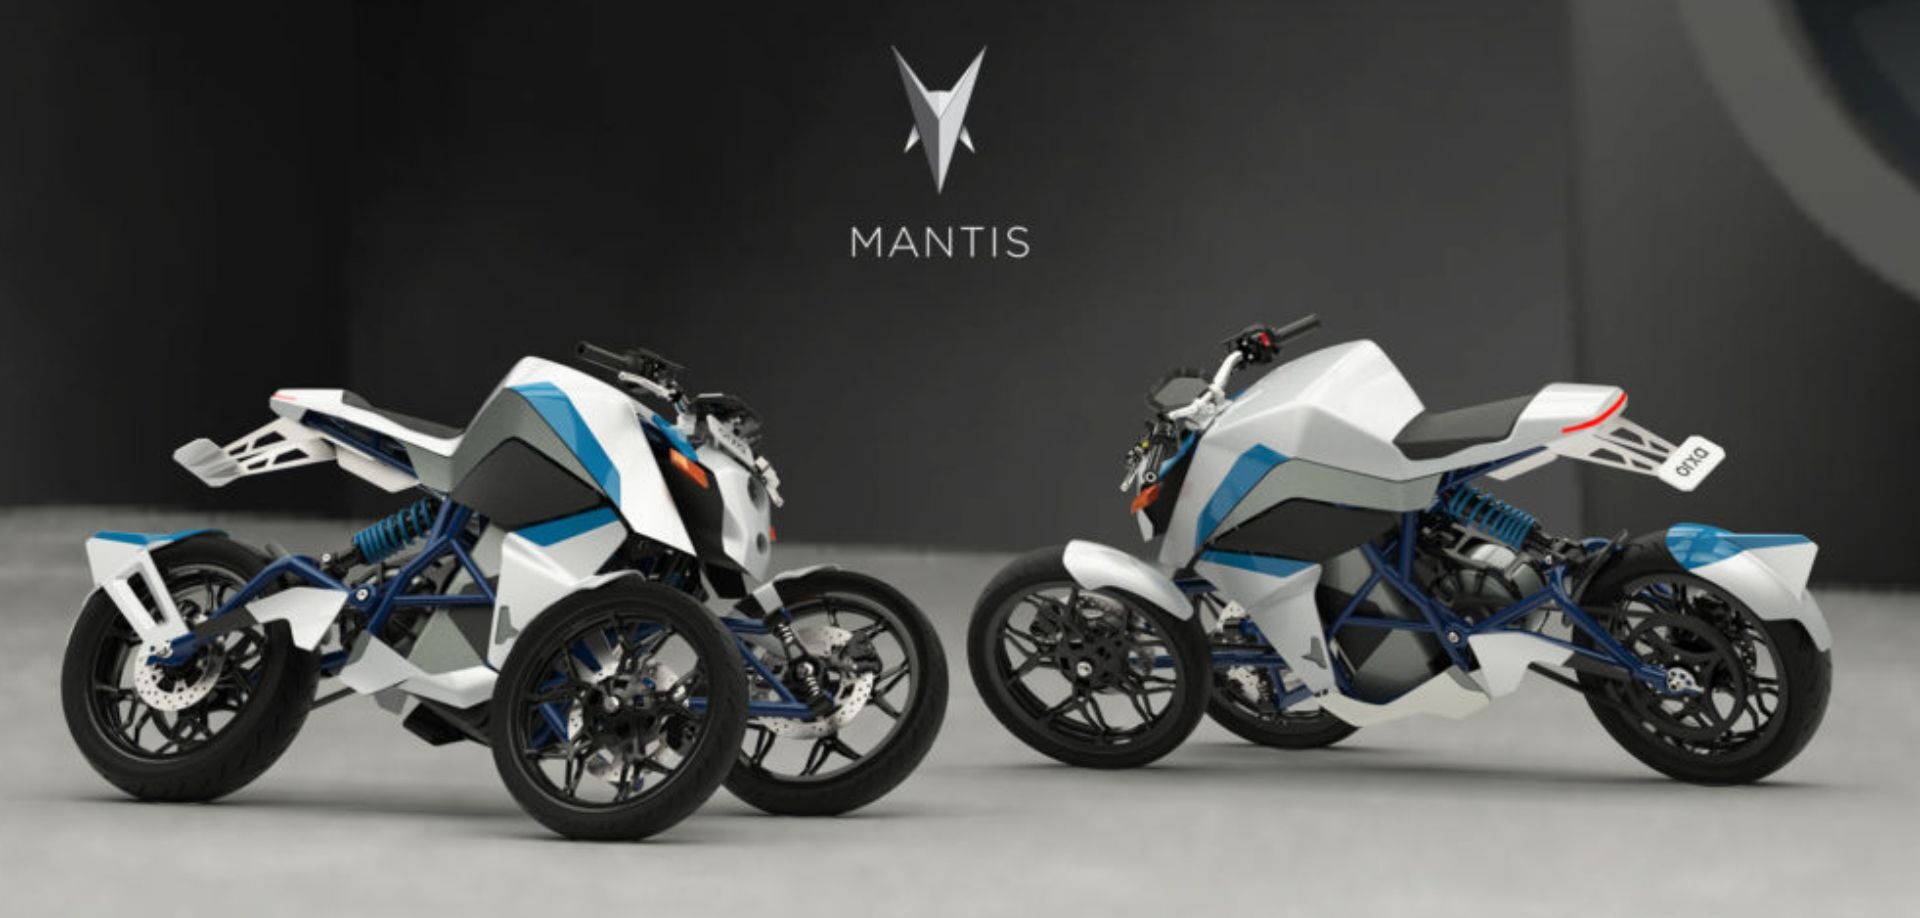 https://electric-vahaninfo.com/orxa-mantis-electric-bike-launched-at-rs-3-6-lakh-221-km-range/